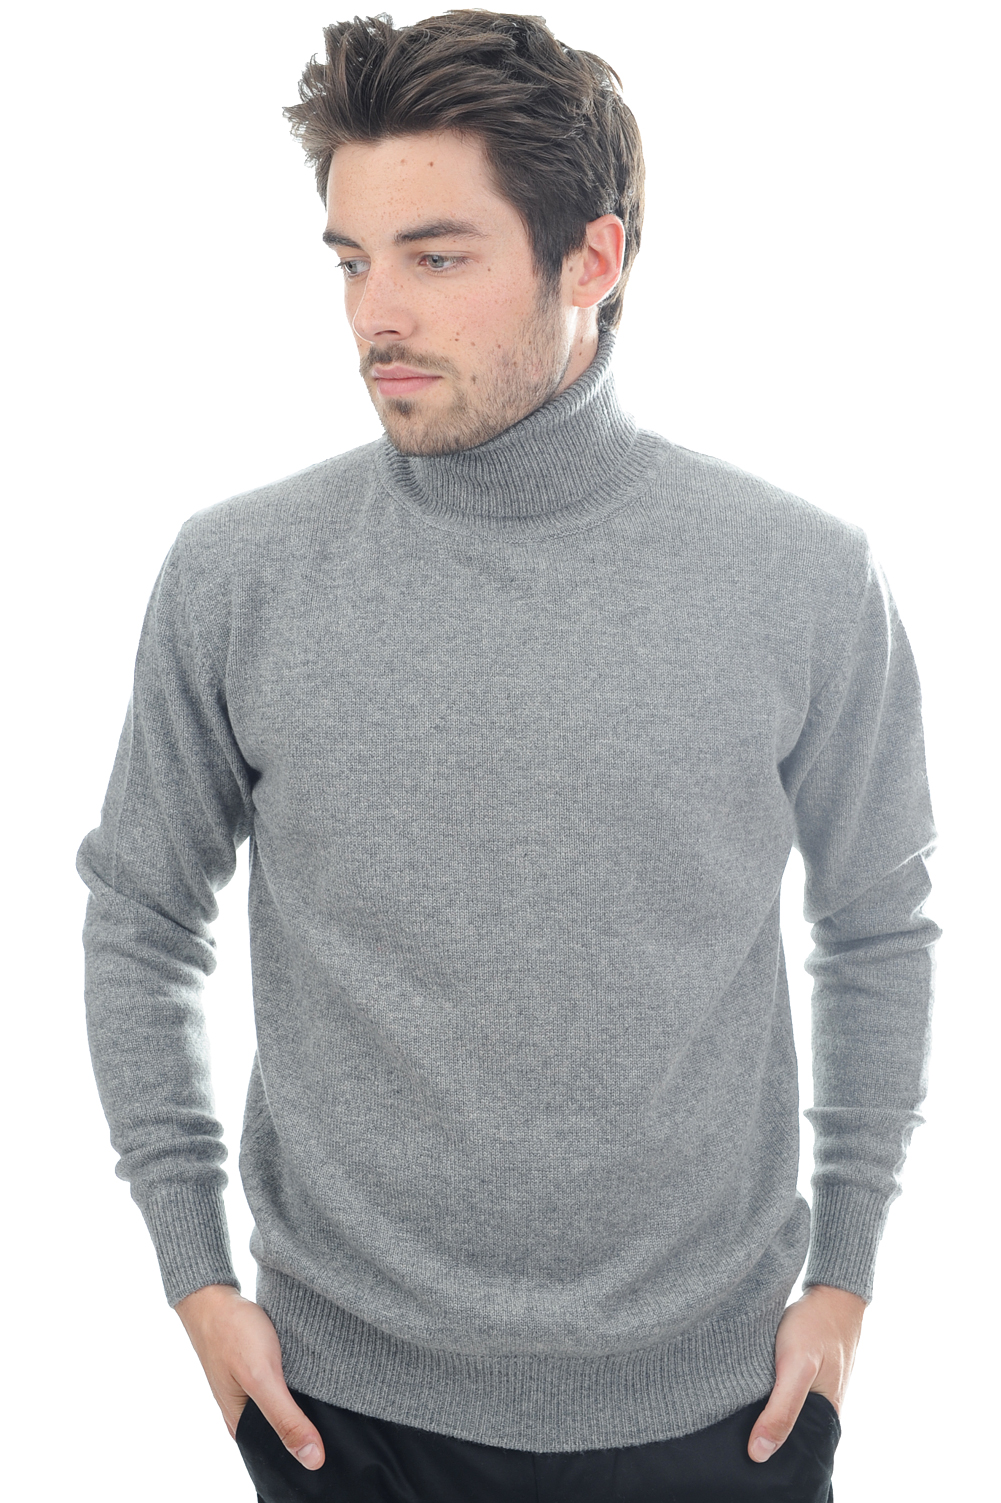 Cachemire pull homme col roule edgar 4f gris chine m